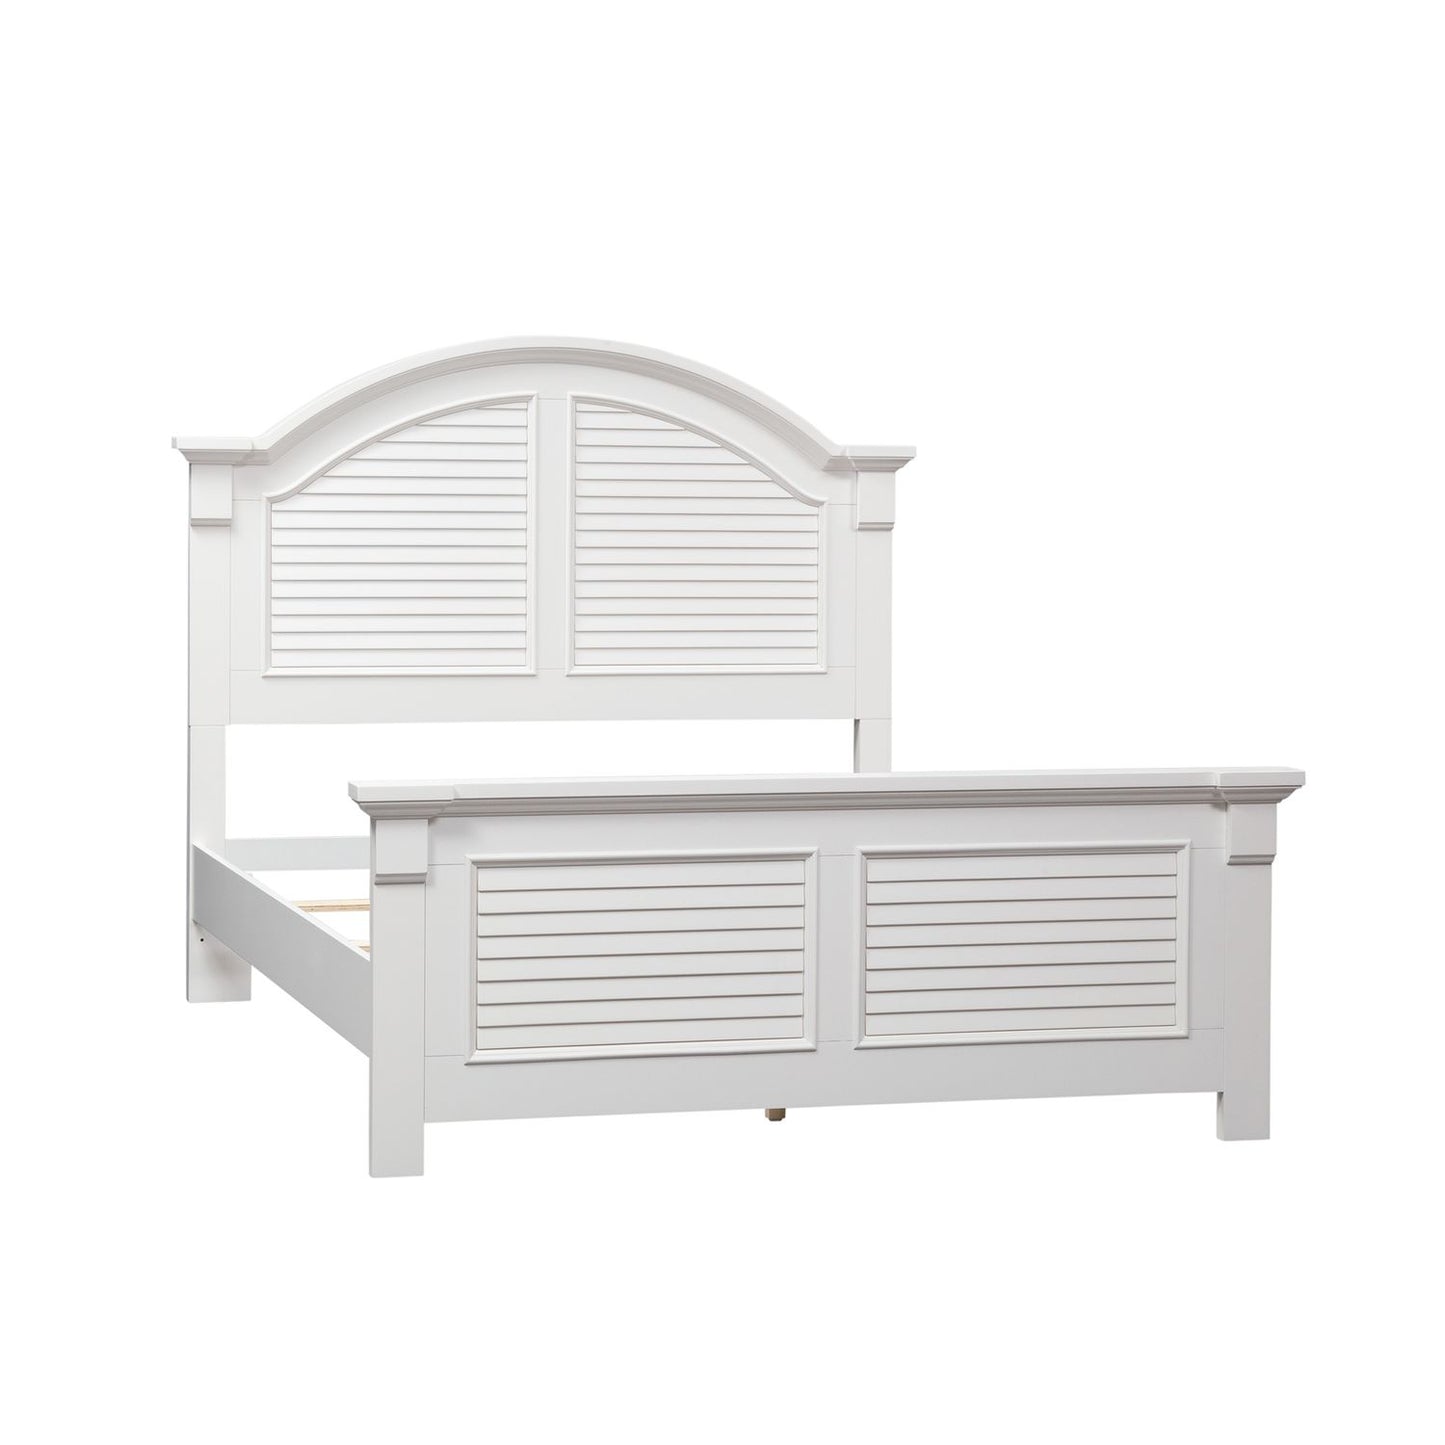 Summer House I - Queen Panel Bed